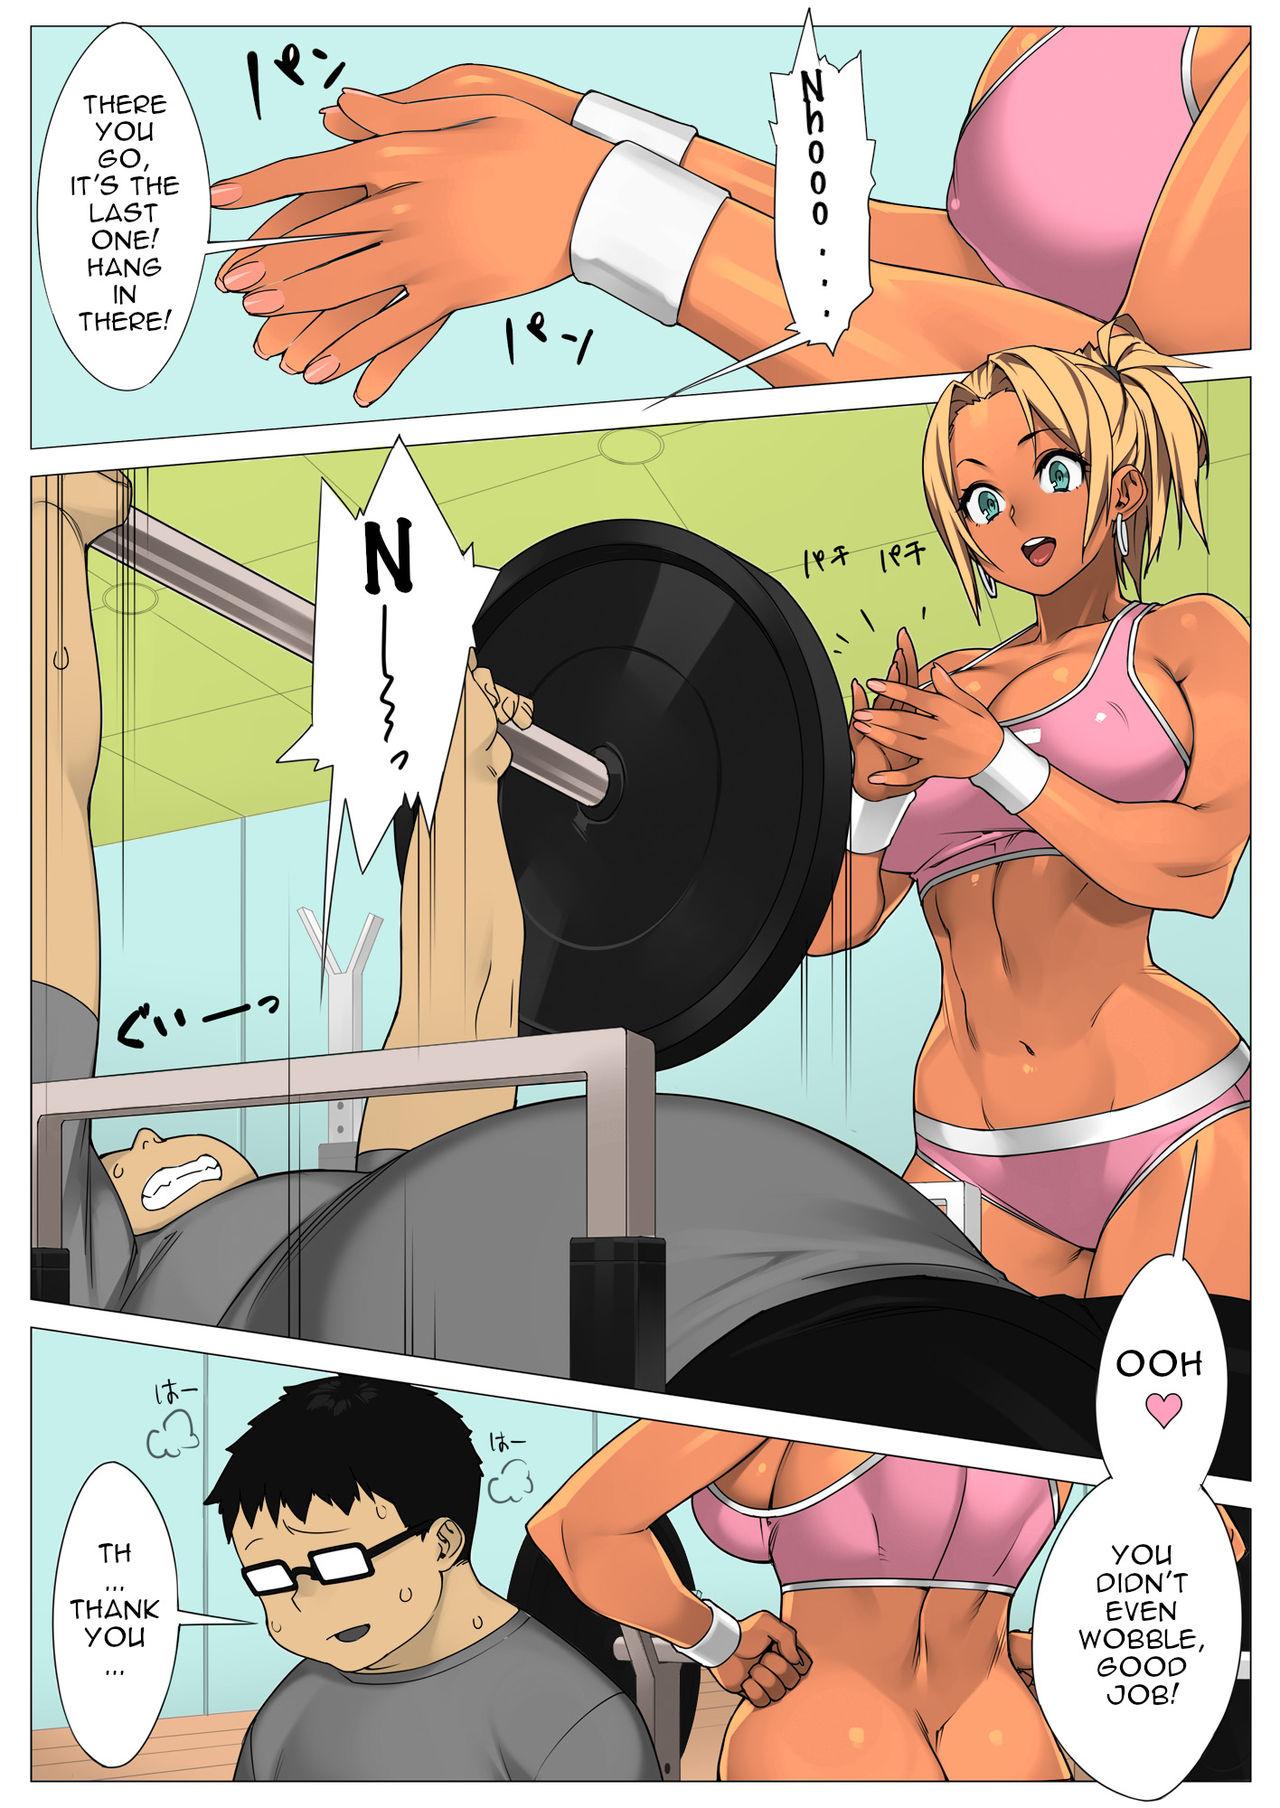 Exotic TRAINING DAY - Original Bubblebutt - Page 2